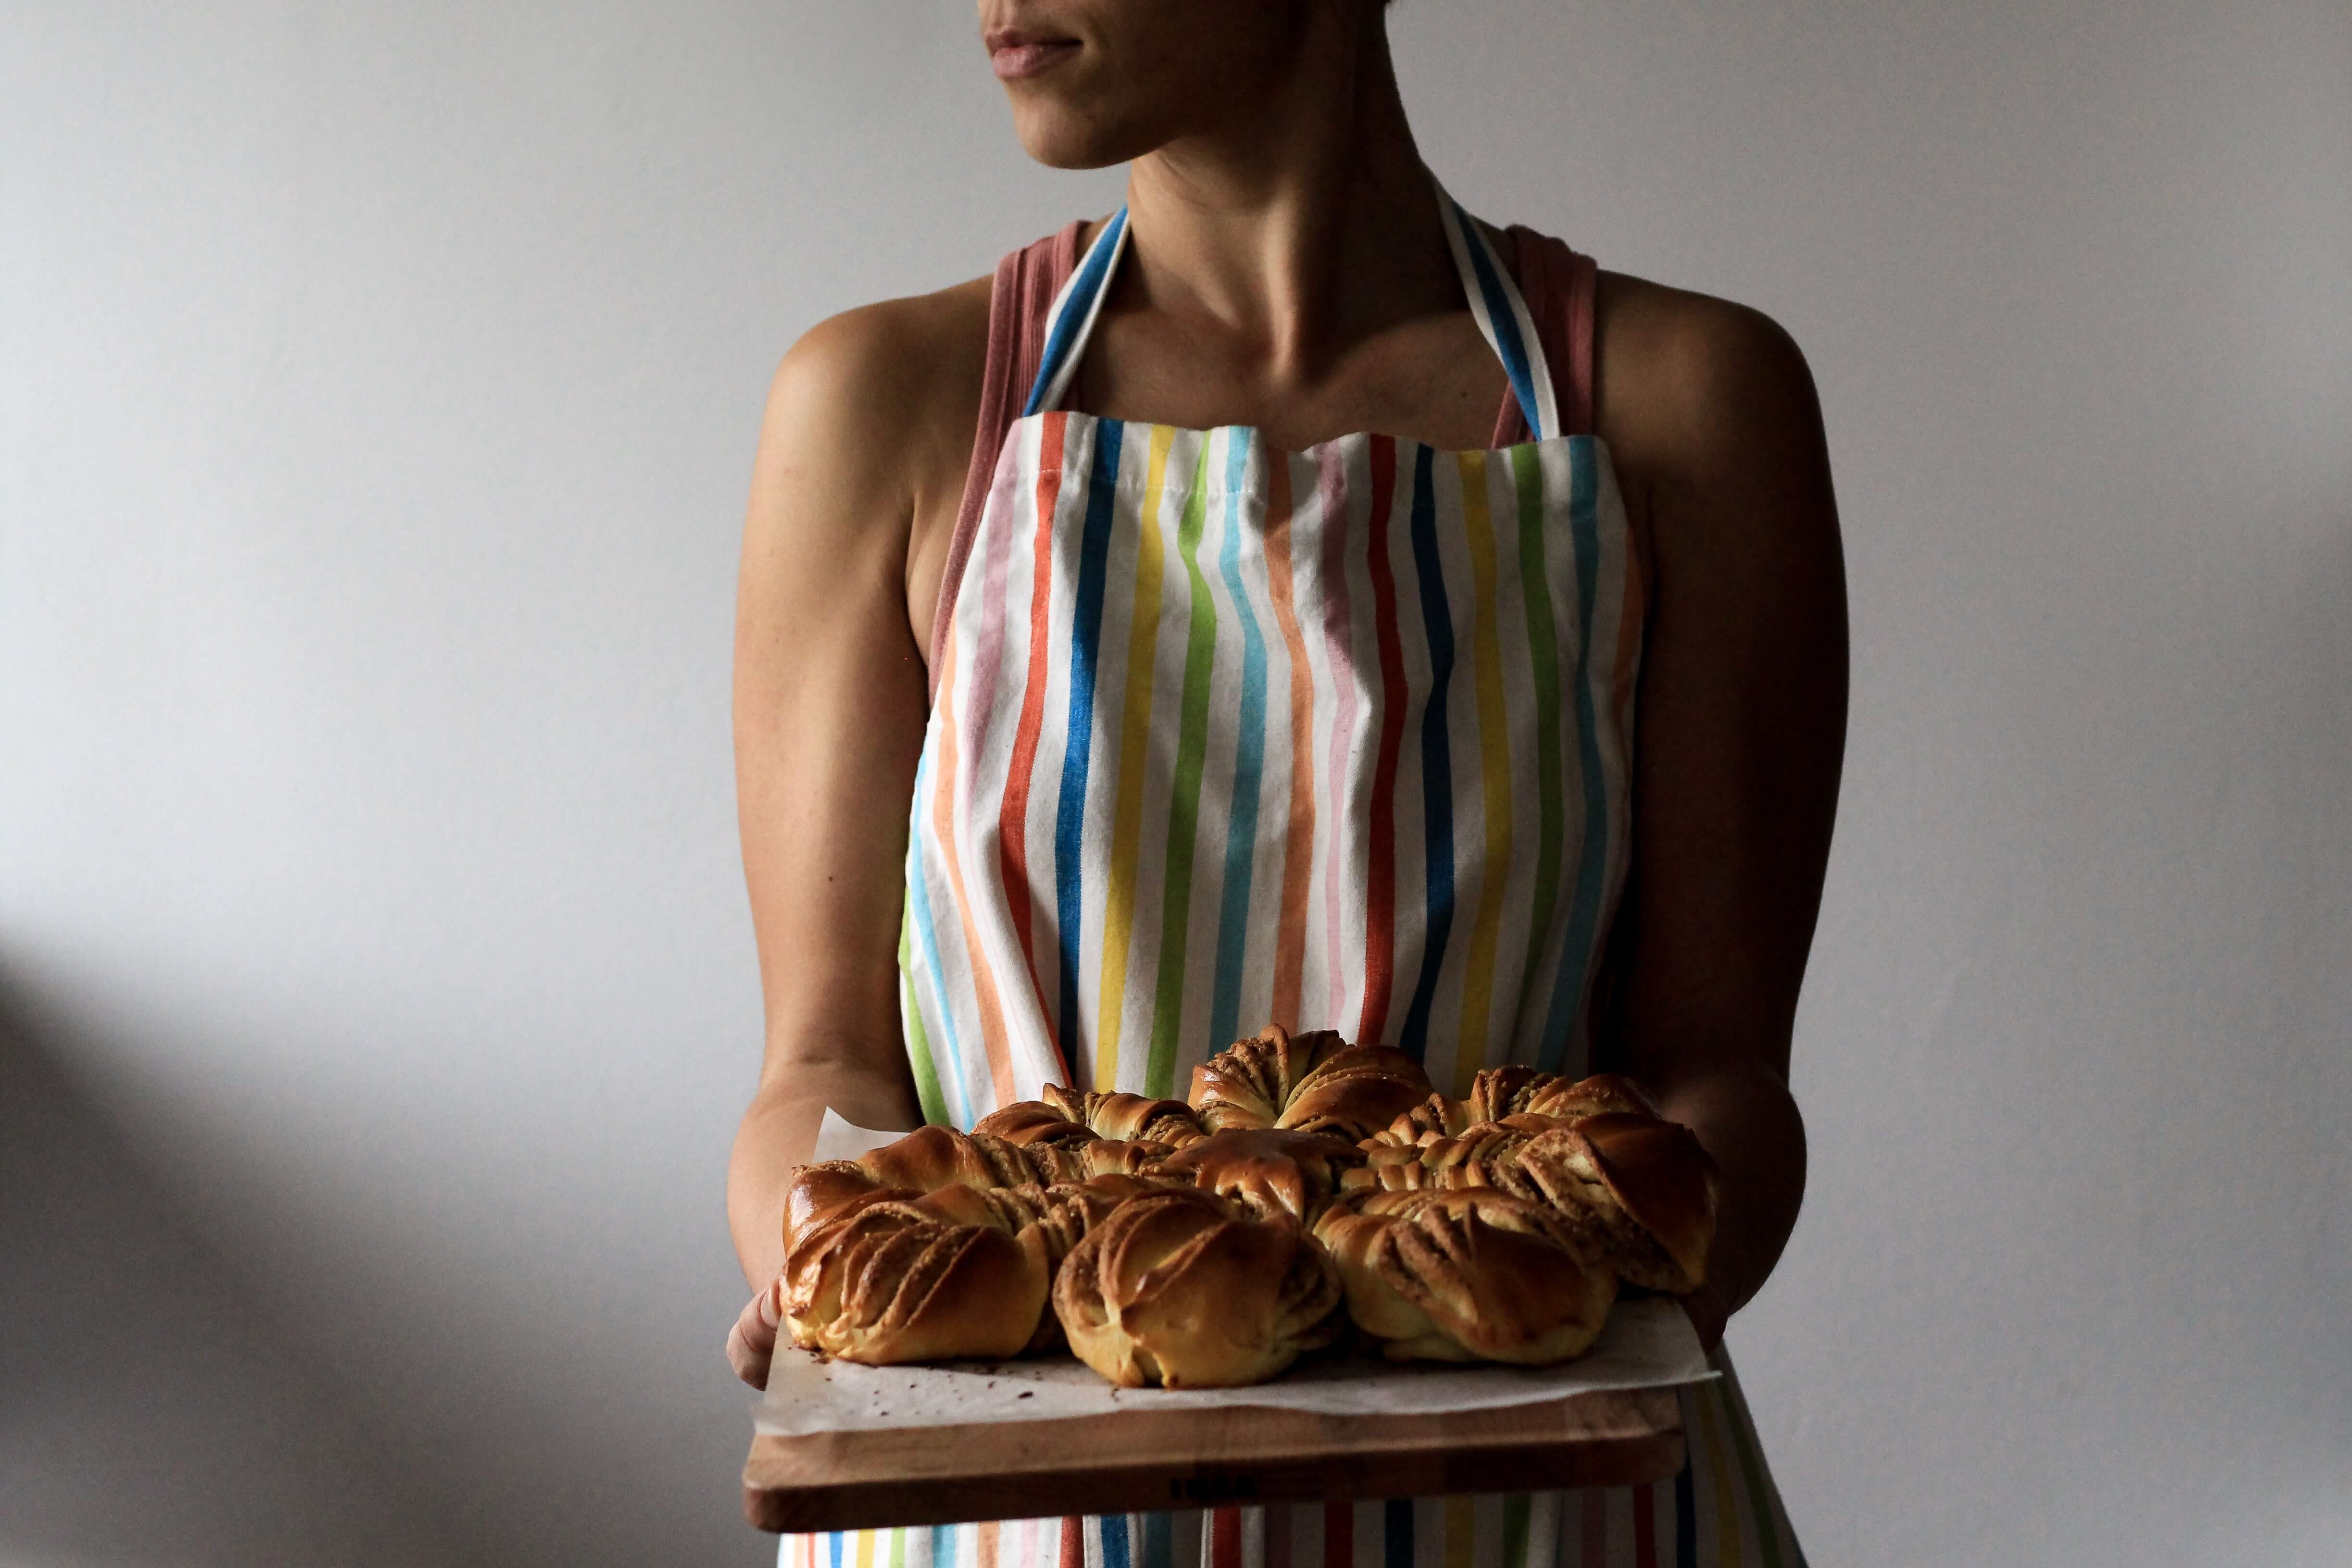 A person wearing a colorful striped apron and holding a tray of pastries